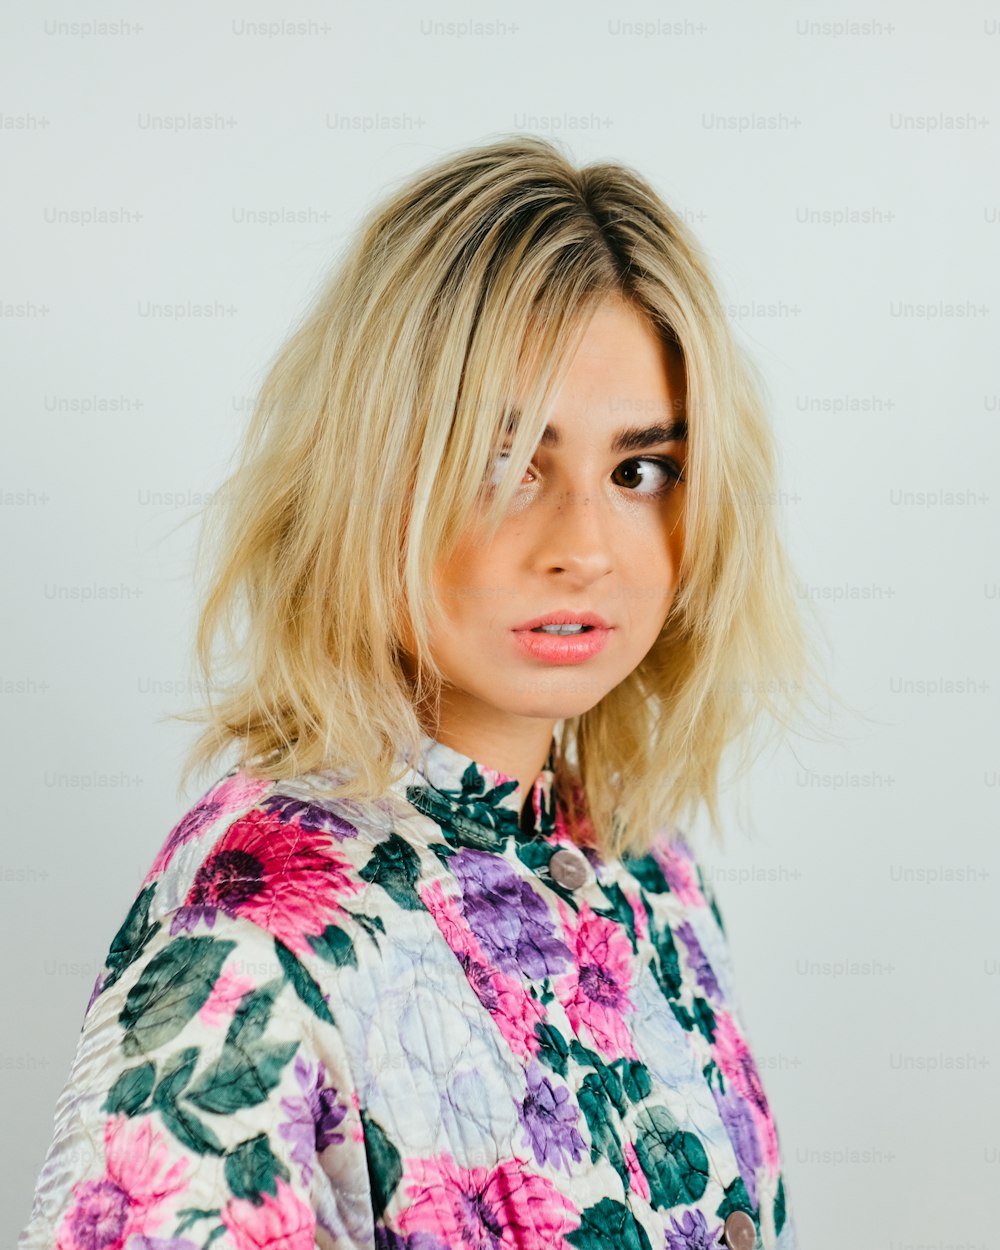 a woman with blonde hair wearing a floral shirt